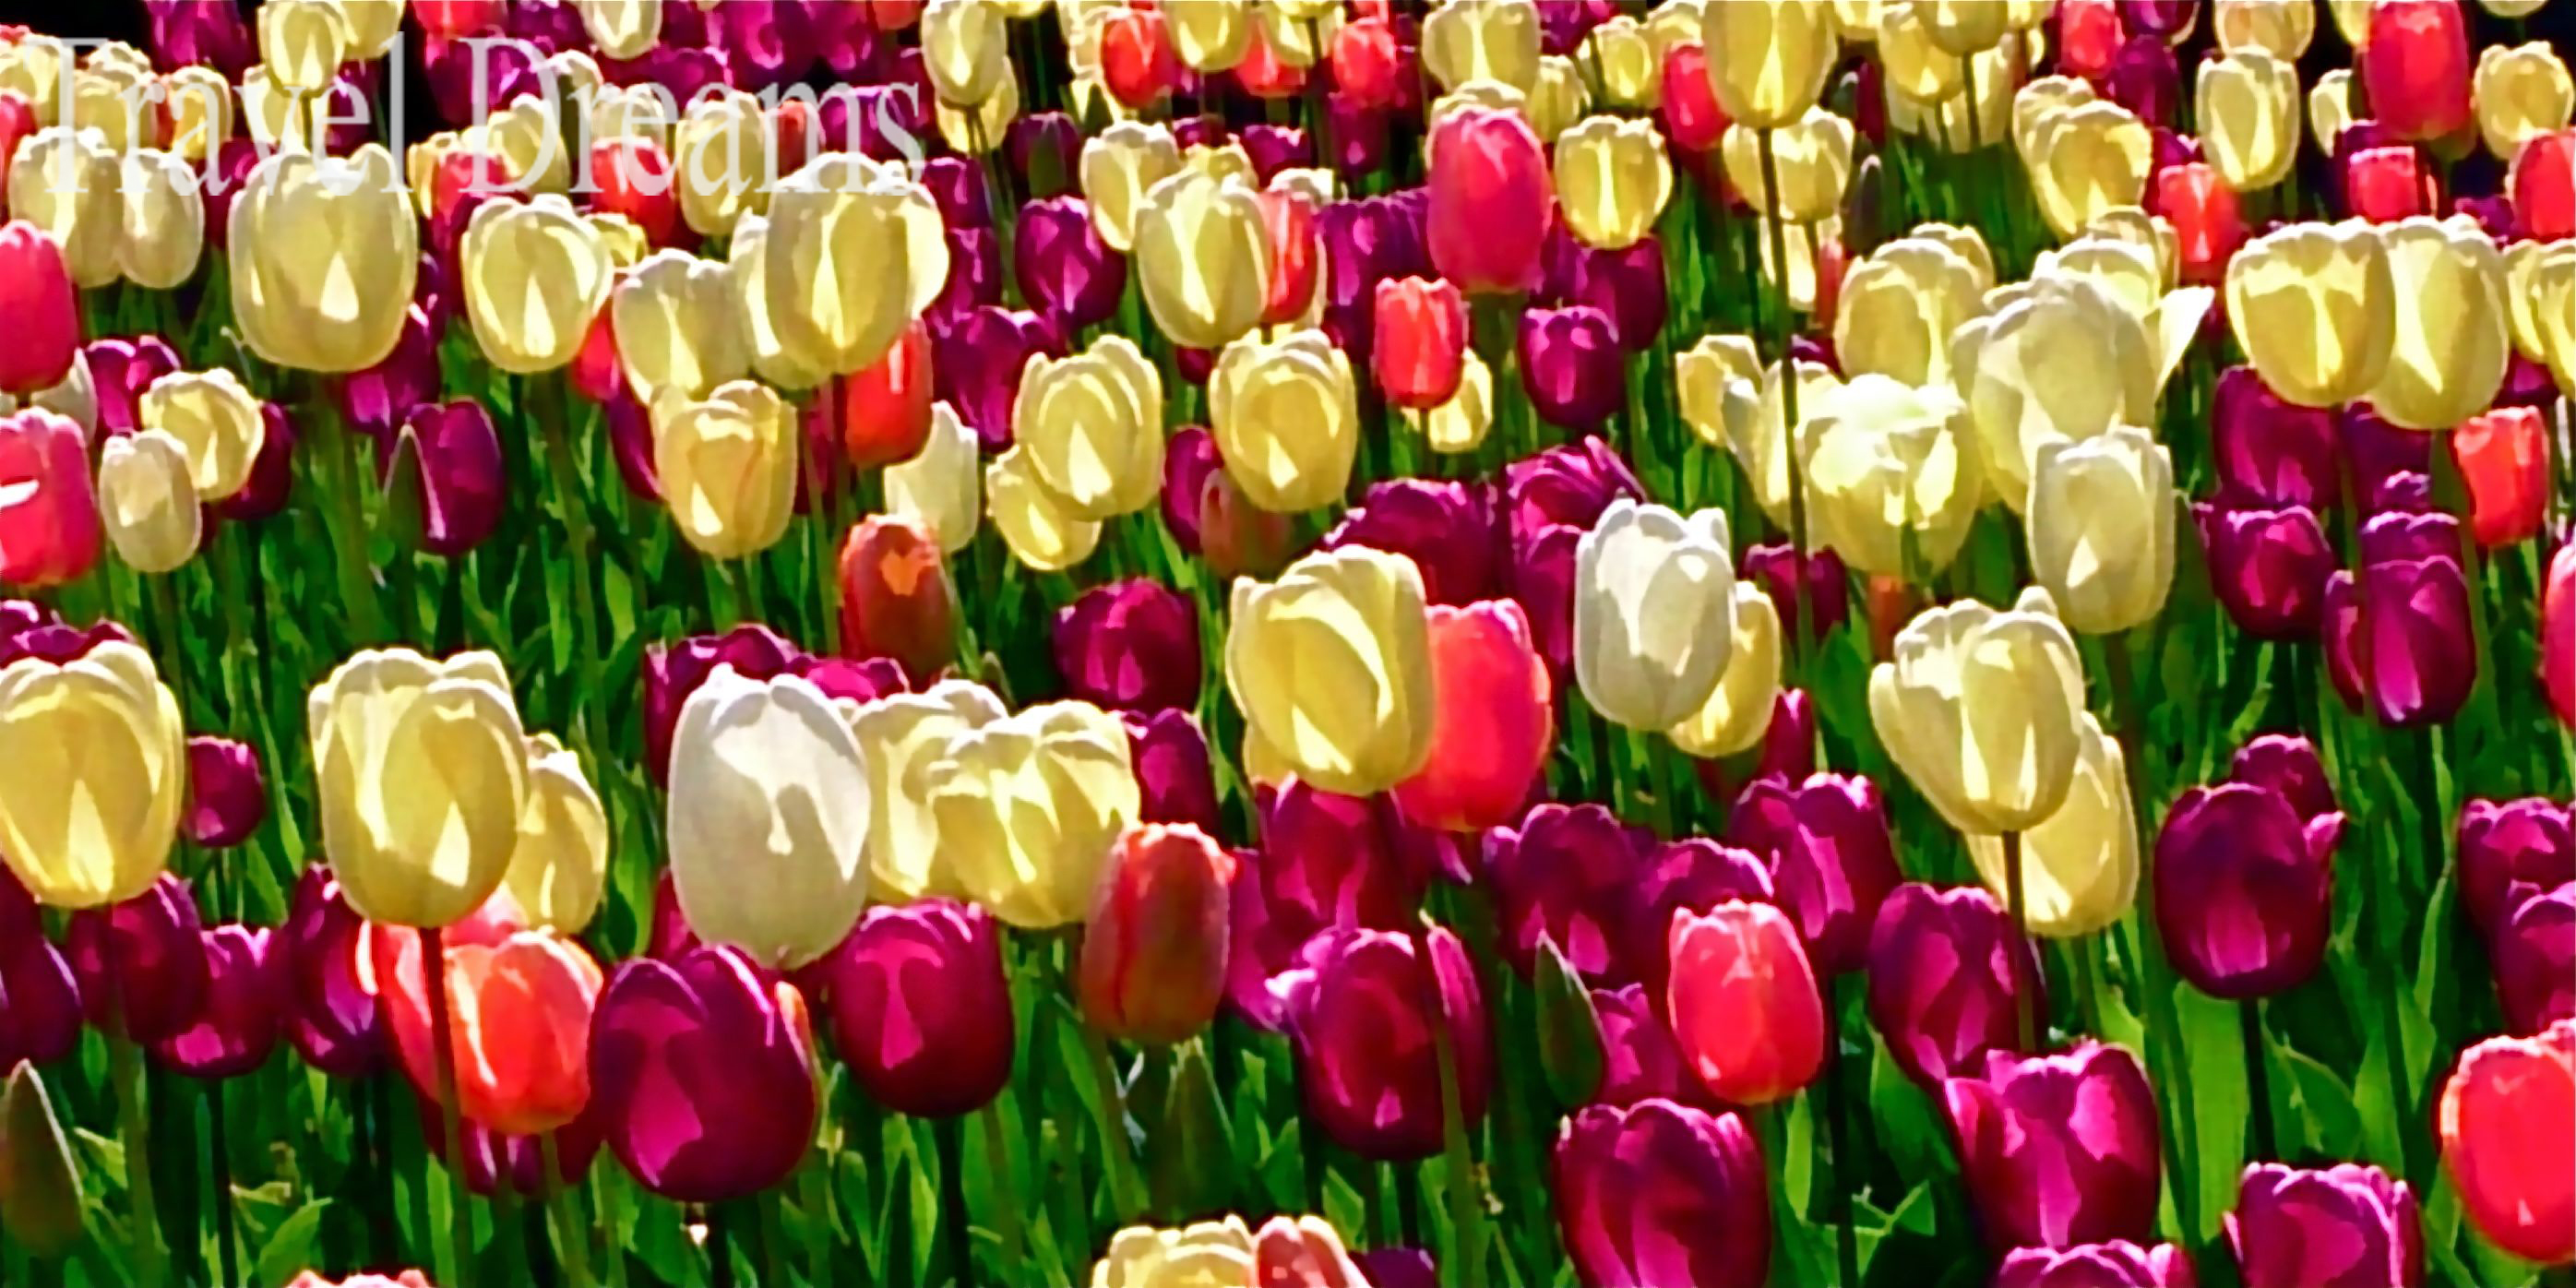 Bed of Tulips